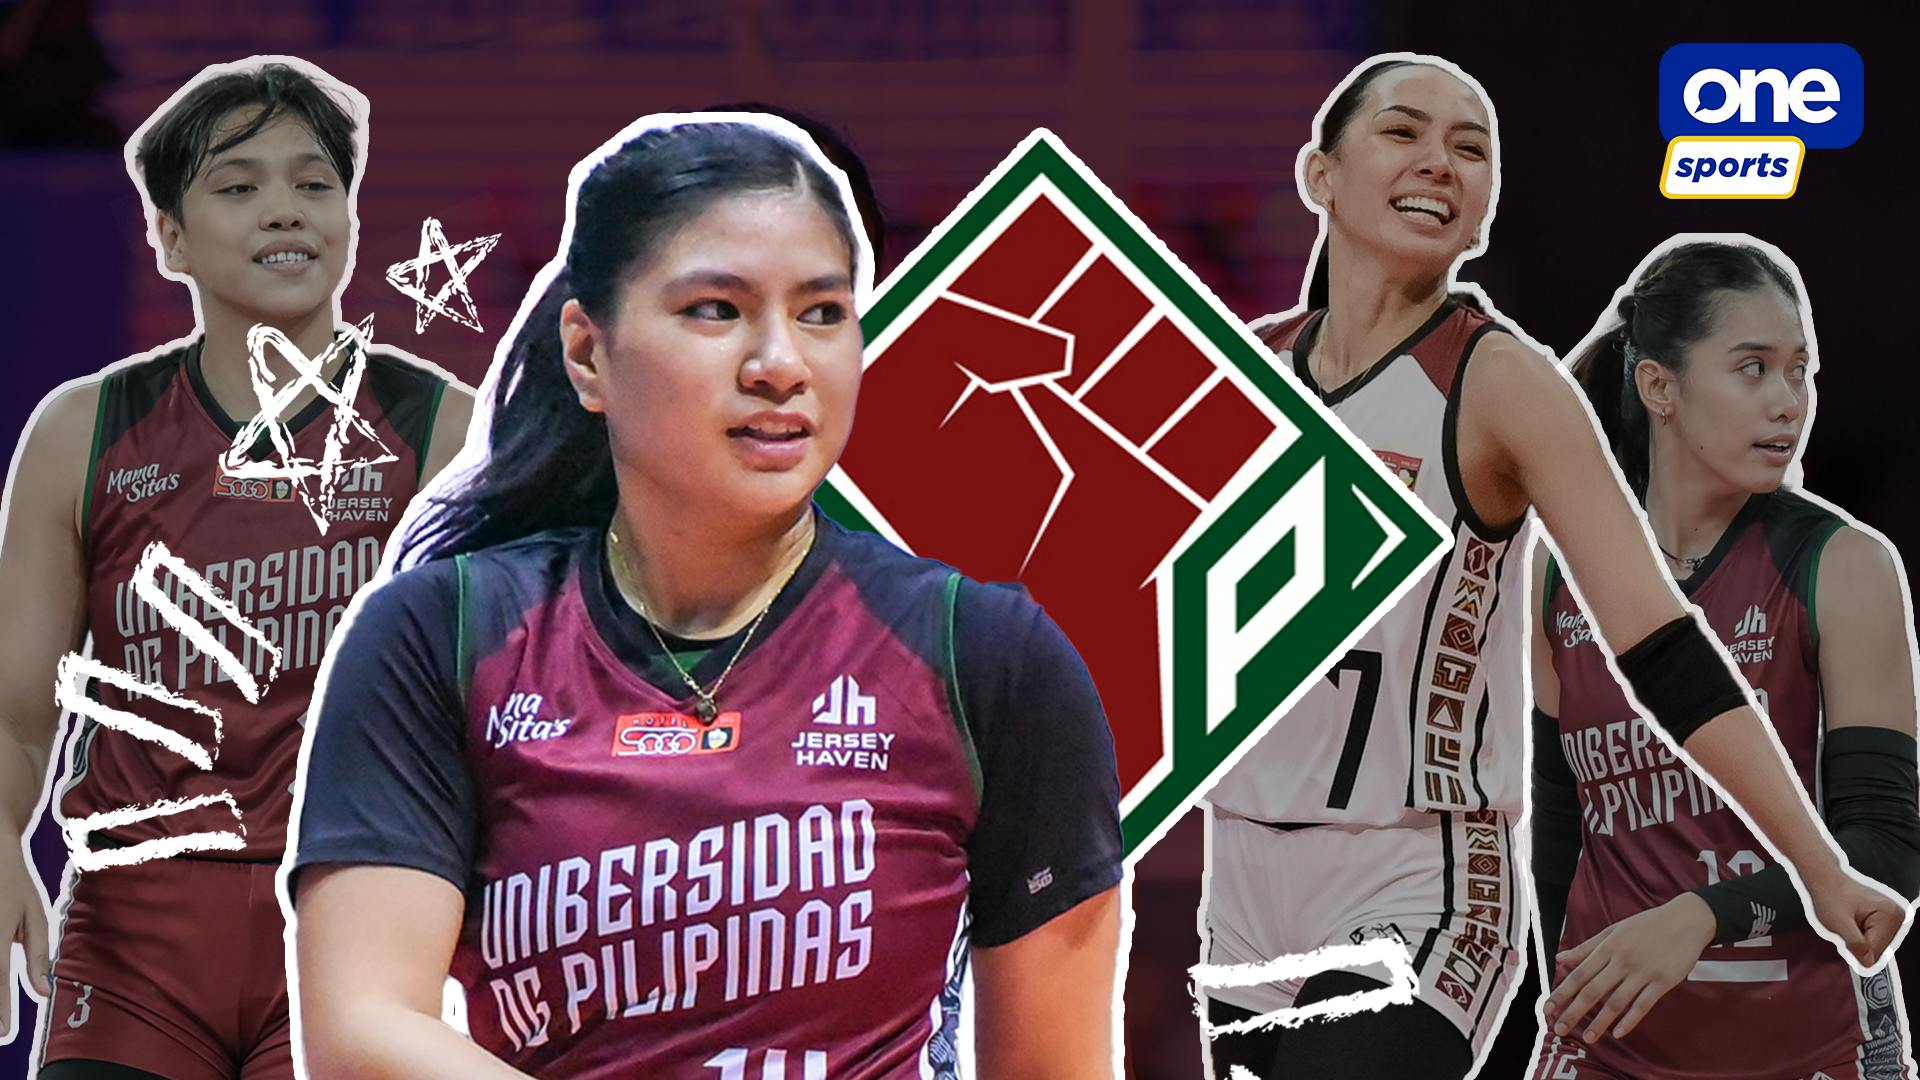 Fight for their way: Team captain Abi Goc and UP in it to win it in UAAP Season 86